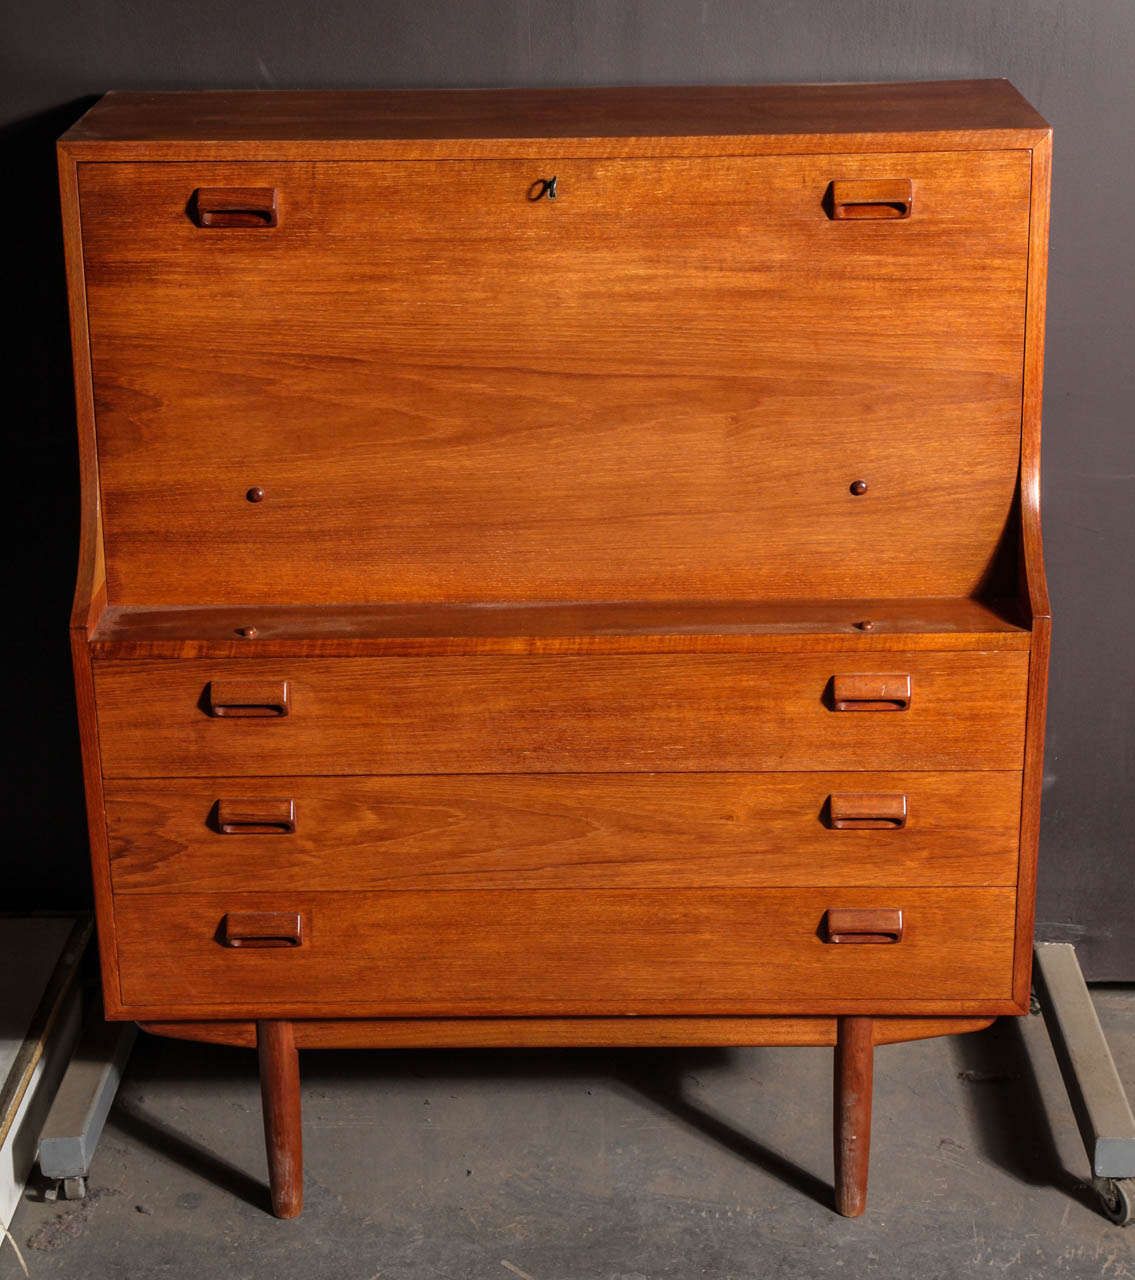 Vintage 1950s Borge Mogensen Teak Secretary.

This Vintage Secretary Desk is in like new condition. A great storage for your laptop computer, and extra storage drawers for anything from dinnerware to clothing. This secretary is in like-new